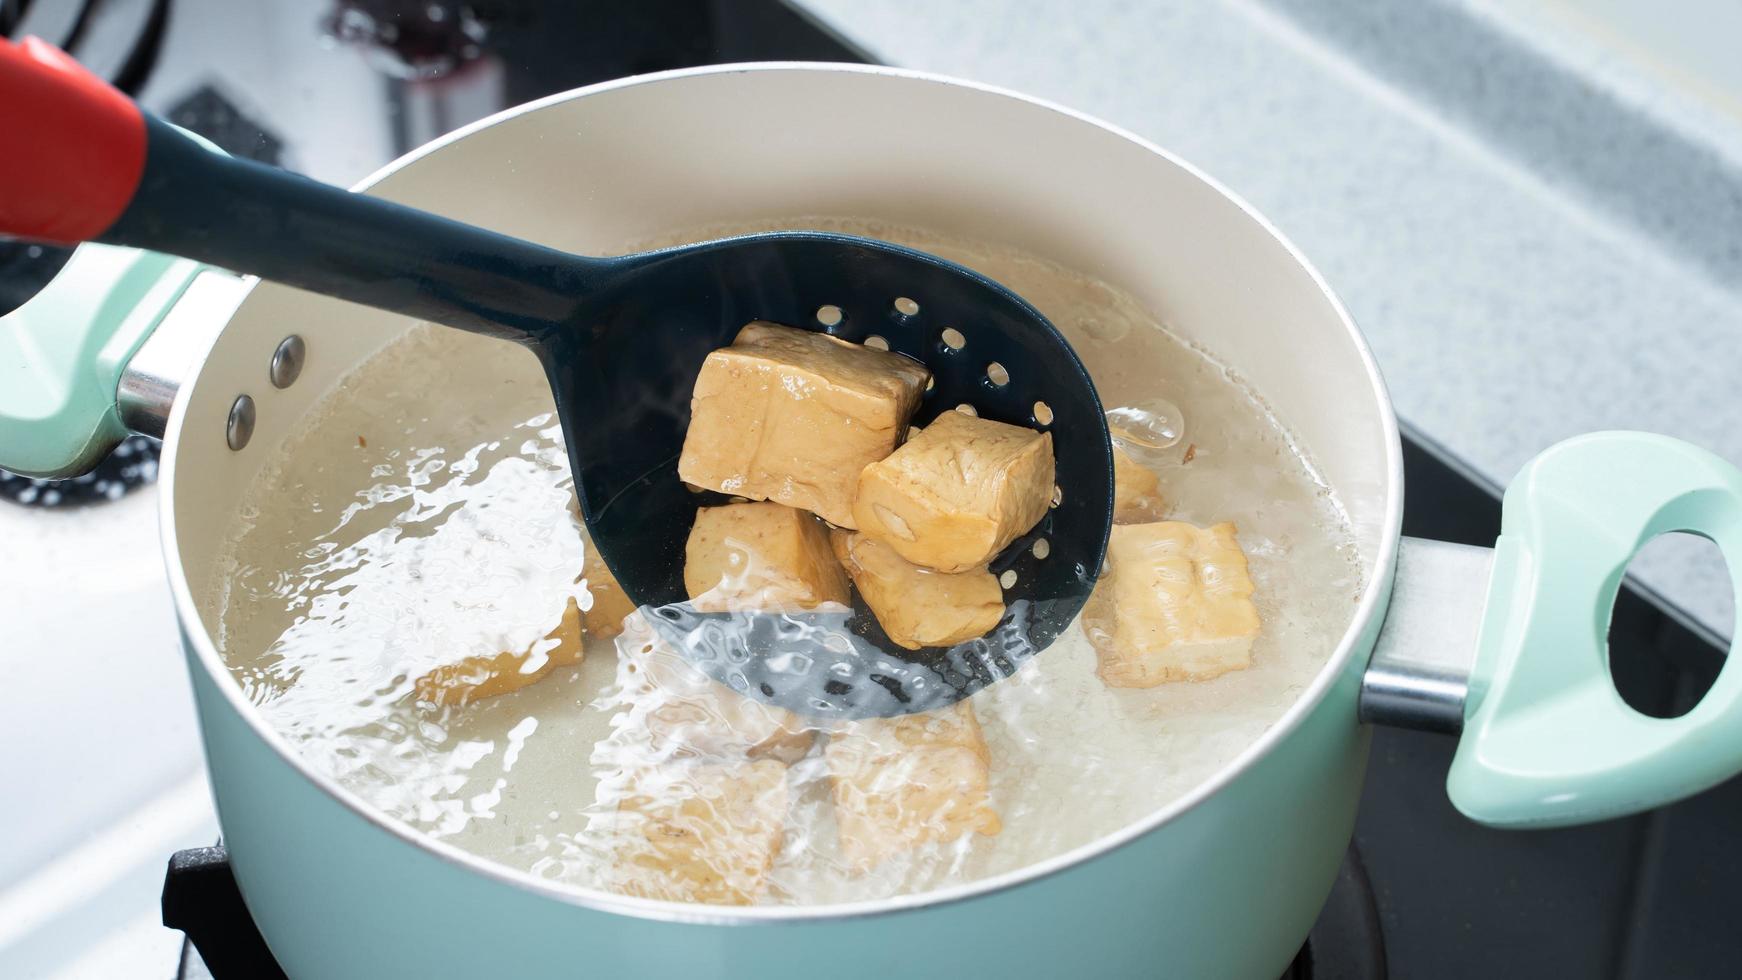 Cooking diced cubed dried tofu on gas stove in home kitchen, lifestyle, closeup. photo